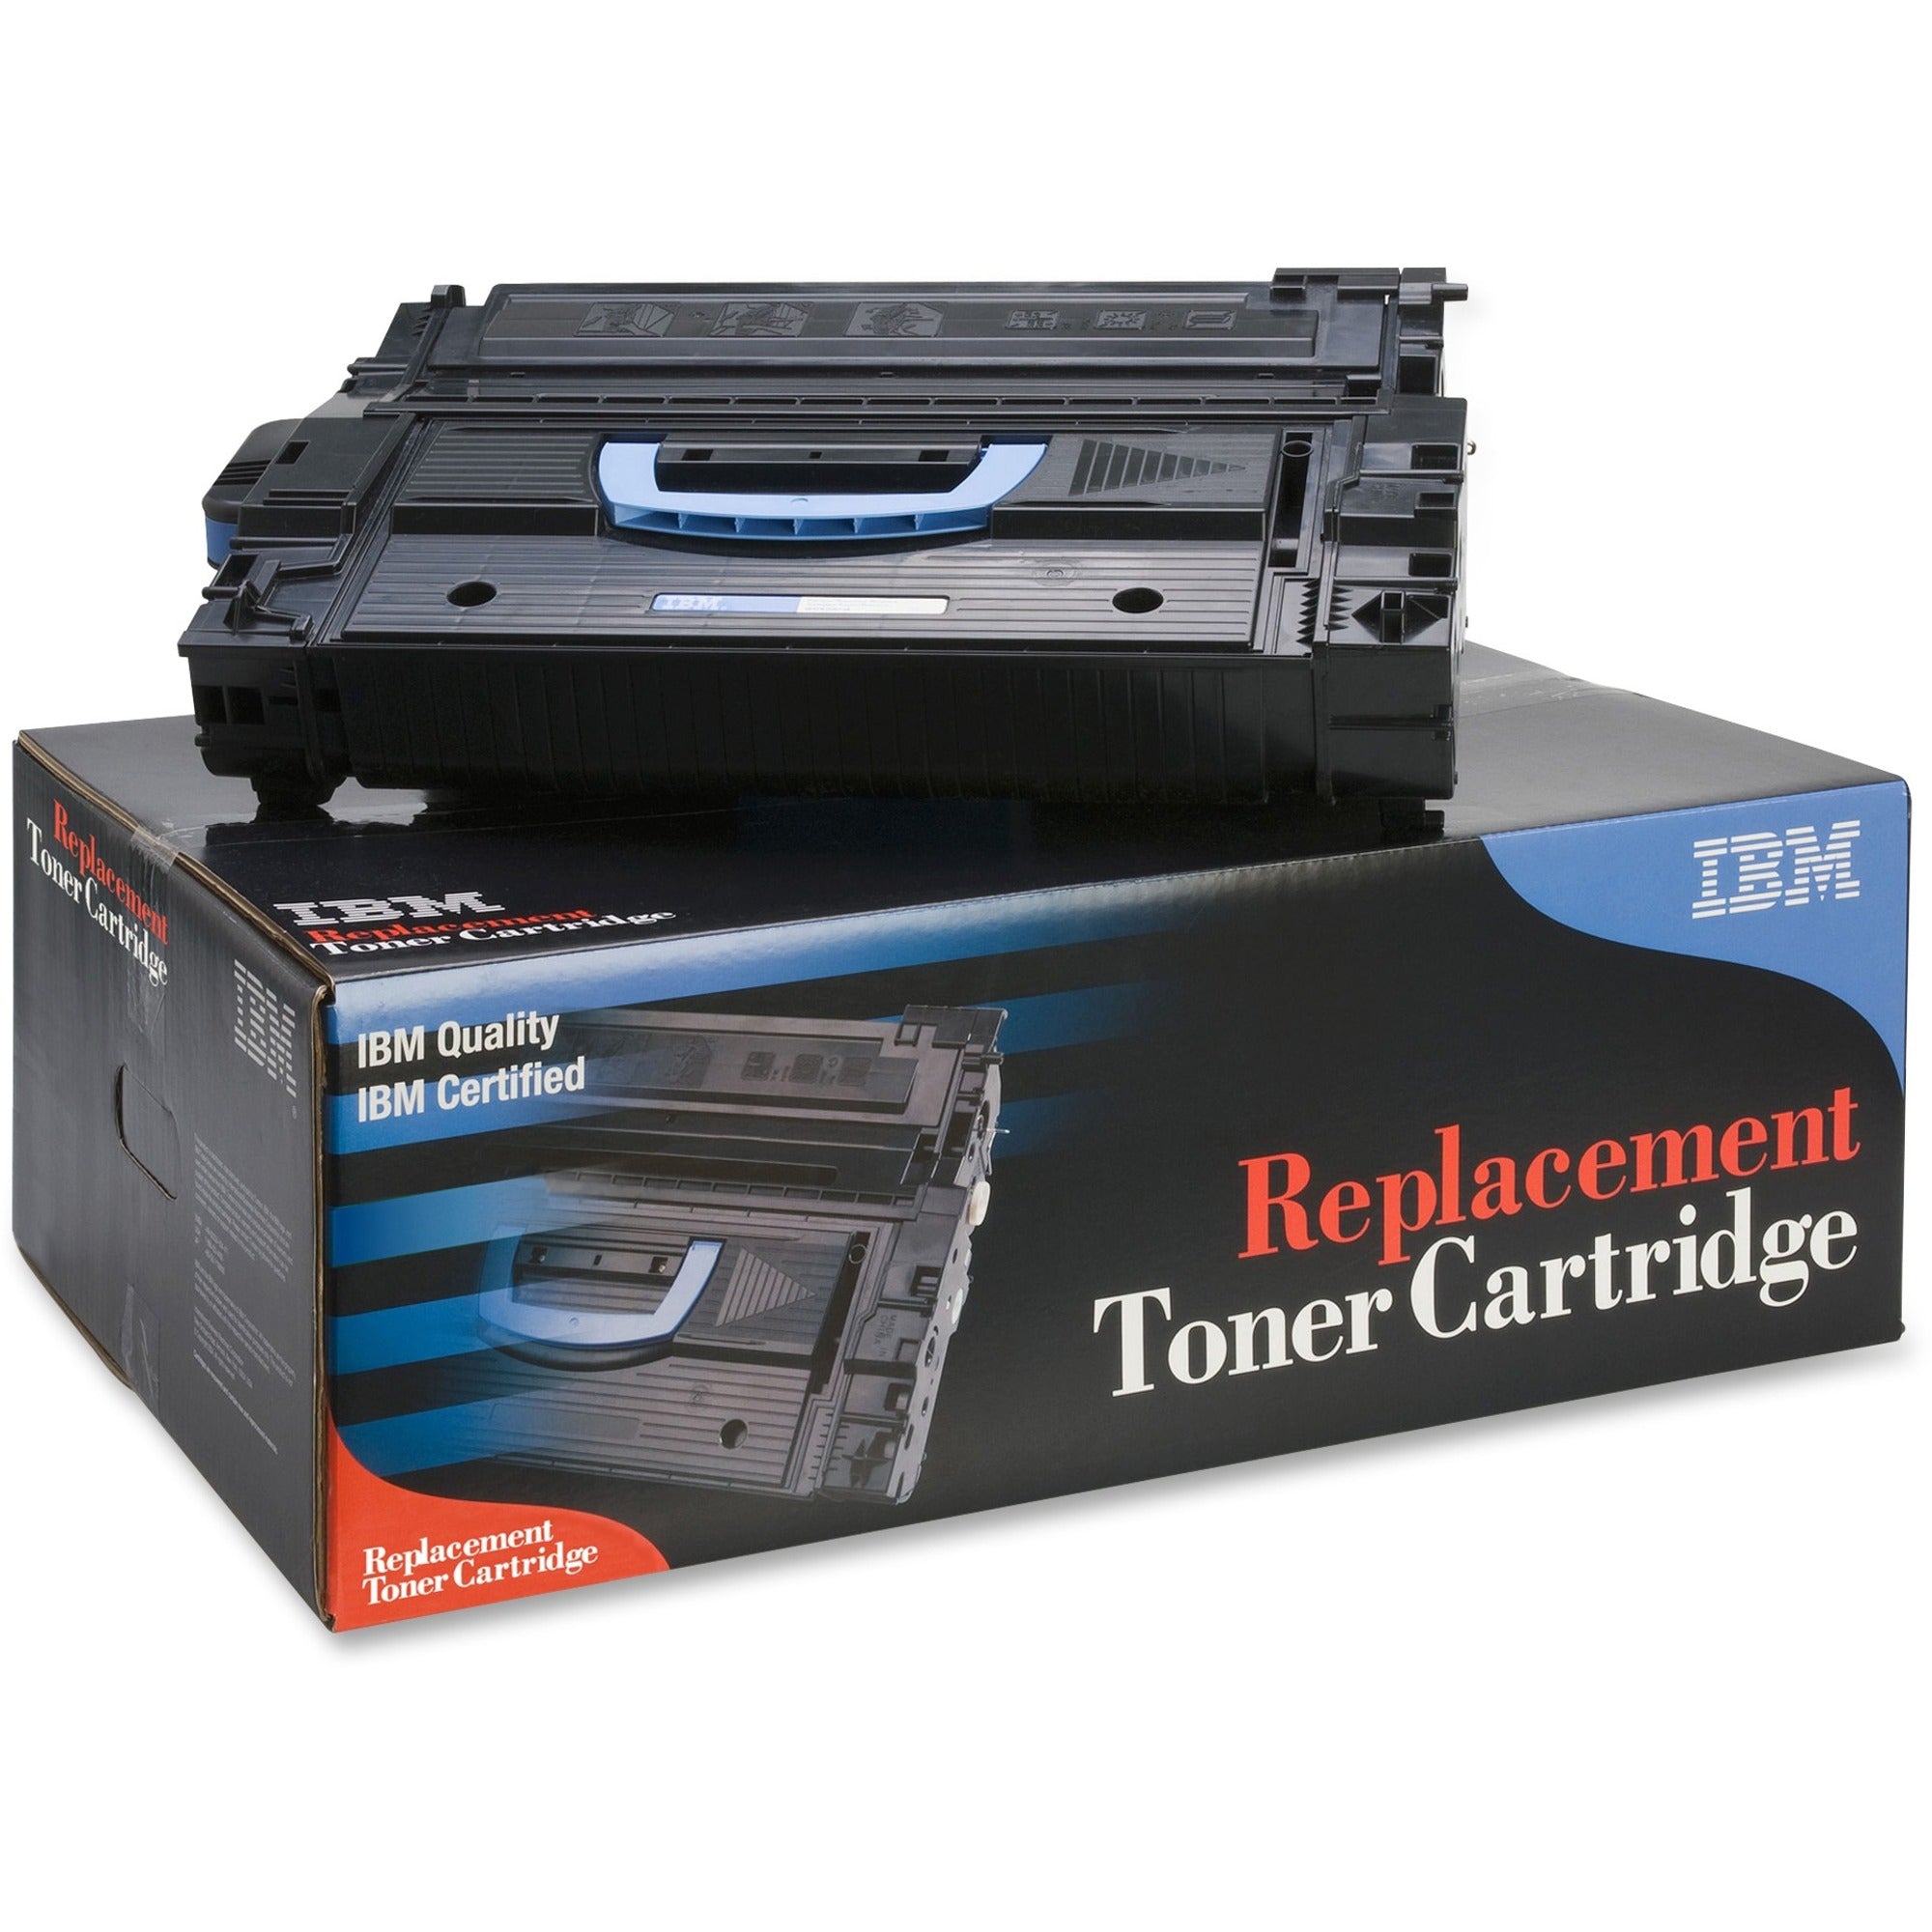 IBM Remanufactured High Yield Laser Toner Cartridge - Alternative for HP 25X (CF325X) - Black - 1 Each - 34500 Pages - 